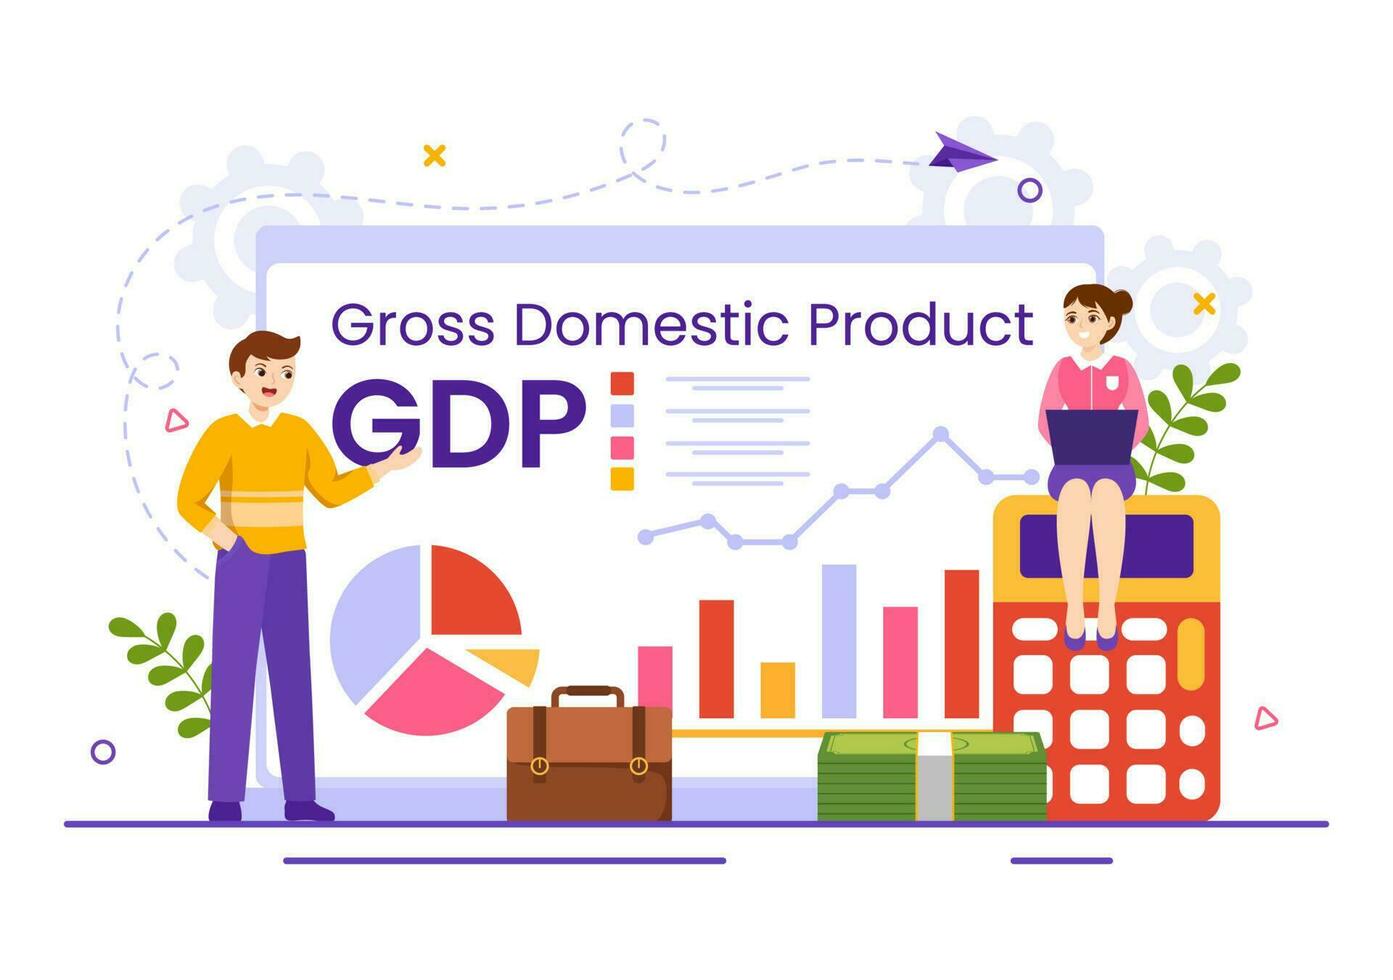 GDP or Gross Domestic Product Vector Illustration with Economic Growth Column and Market Productivity Chart in Flat Cartoon Hand Drawn Templates